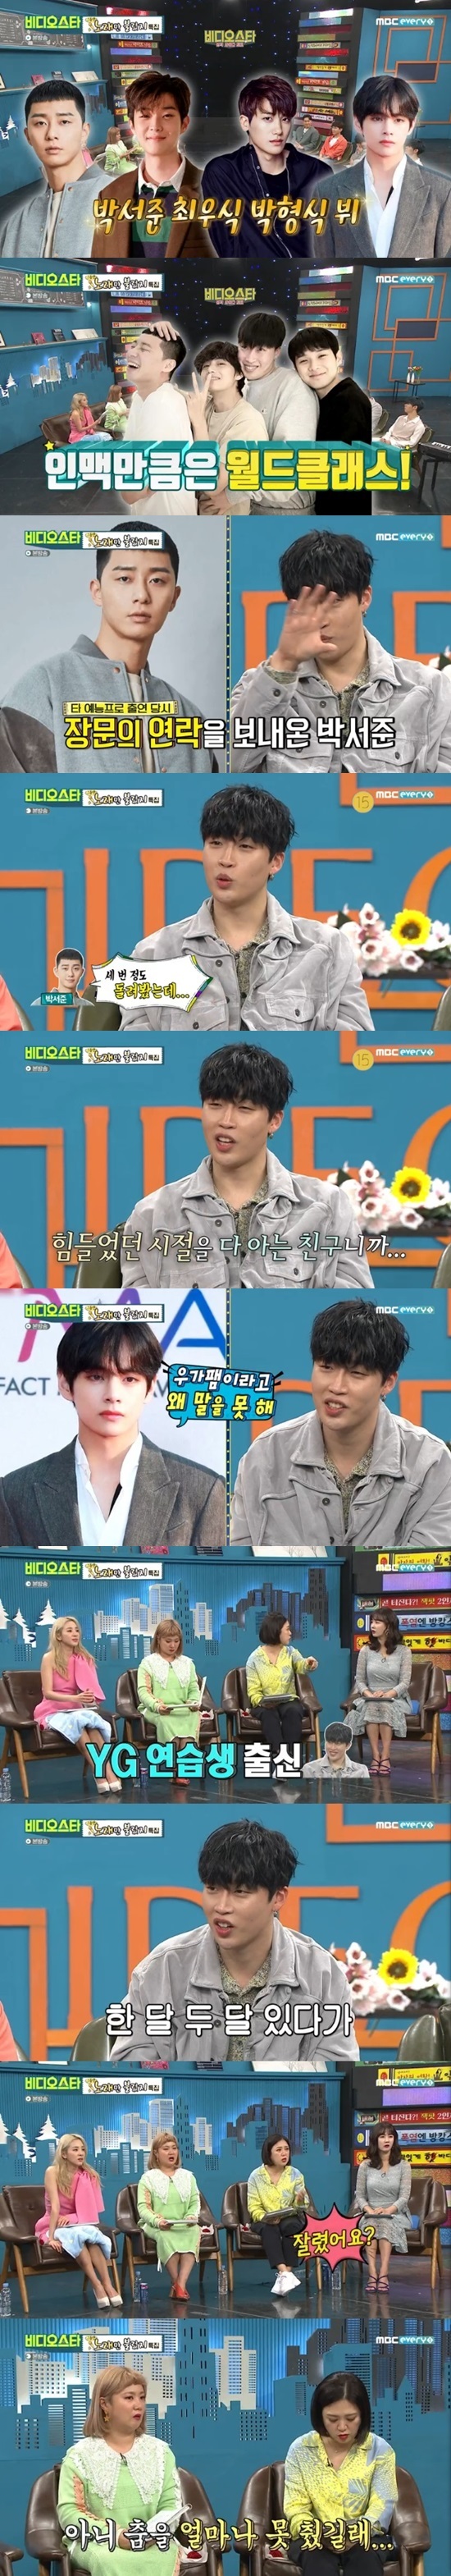 The Resurrection of Pigboy Crabshaw has spoken to his best friend Park Seo-joon, V, and past trainees.In MBC Everlons Video Star, which was broadcast on April 28, eardrum boyfriends Ha Dong-gyun, Kim Pil, Paul Kim, The Resurrection of Pigboy Crabshaw, and Gaho appeared.The Resurrection of Pigboy Crabshaw said that Park Seo-joon Choi Woo-sik, Park Hyung-sik V and his best friend, are a member of the family.He told me to do well.The Resurrection of Pigboy Crabshaw said, Park Seo-joon sent a long message when I first went out What do you play?I ran it three times, but it was said that I was upset. I know all that before and after the birth. I also said that I am a friend of Park Seo-joon.If V is going to talk, he told me to talk clearly. When Park asked, Are you suffering from entertainer disease? The Resurrection of Pigboy Crabshaw replied, There is no entertainer disease.I think thats an early symptom, but now Im in therapy. Im in self-treatment, he admitted, laughing.The Resurrection of Pigboy Crabshaw is also a friend of Paul Kim who appeared together.Paul Kim said, I asked you to write a song, but I have not written it for three years. The Resurrection of Pigboy Crabshaw said, My song is emotional, but I have my own route to make it.Three years later, I was about to start. The Resurrection of Pigboy Crabshaw added, I always see it when I eat alone, adding, I am laughing at the self-described Nahonjada photograph.Here, The Resurrection of Pigboy Crabshaw said, My parents did karaoke until elementary school.The rest of the time was always 999 minutes, he said, adding that he was a YG trainee who almost ate Sandara Park and a rice bowl in addition to the growth environment that had to become a singer.Yoo Gyeong-sang